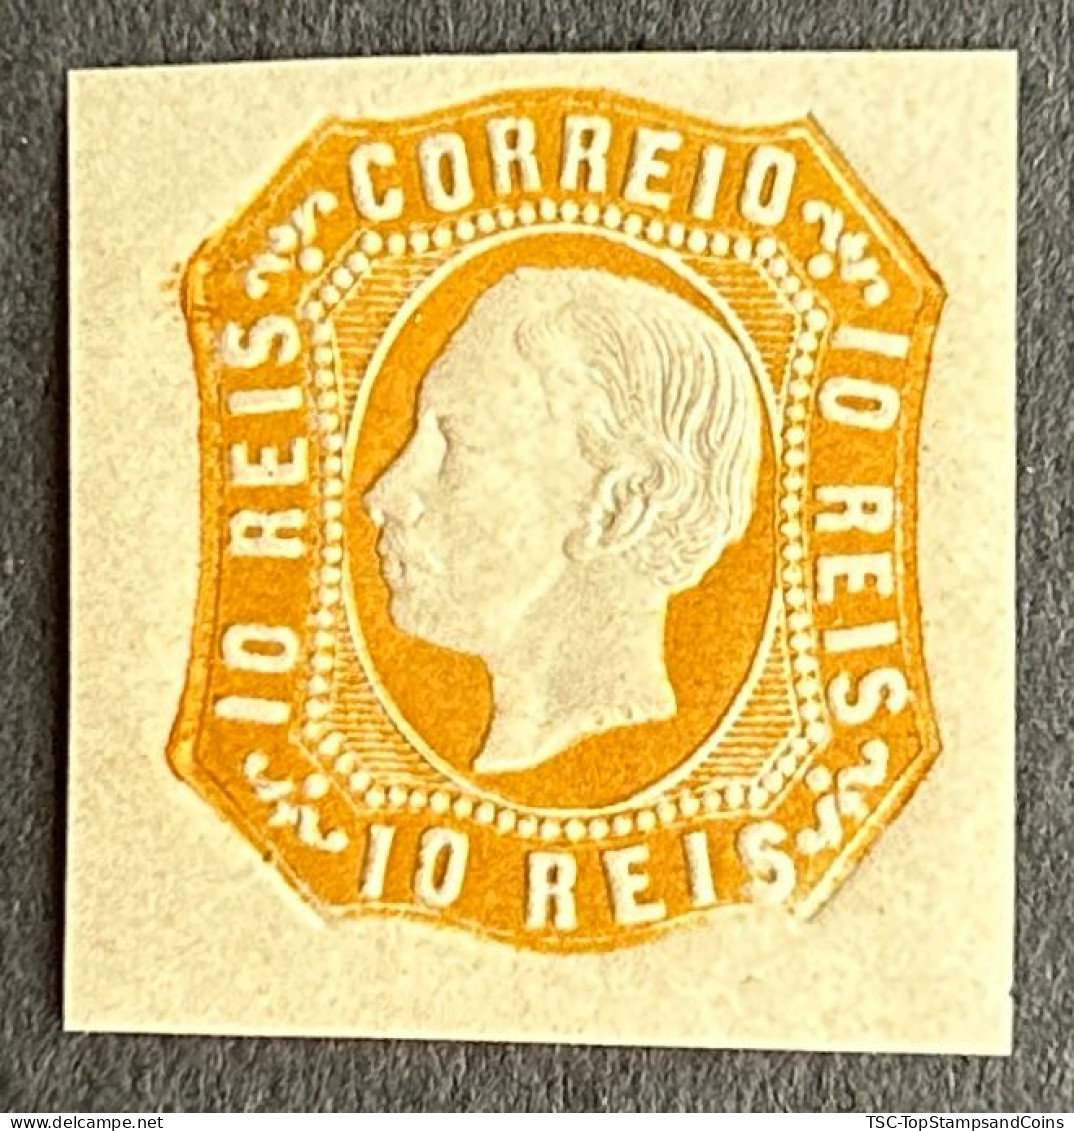 POR0015MNH - King D. Luís I - 10 Reis MNH Non Perforated Stamp - Portugal - 1863 - Nuovi